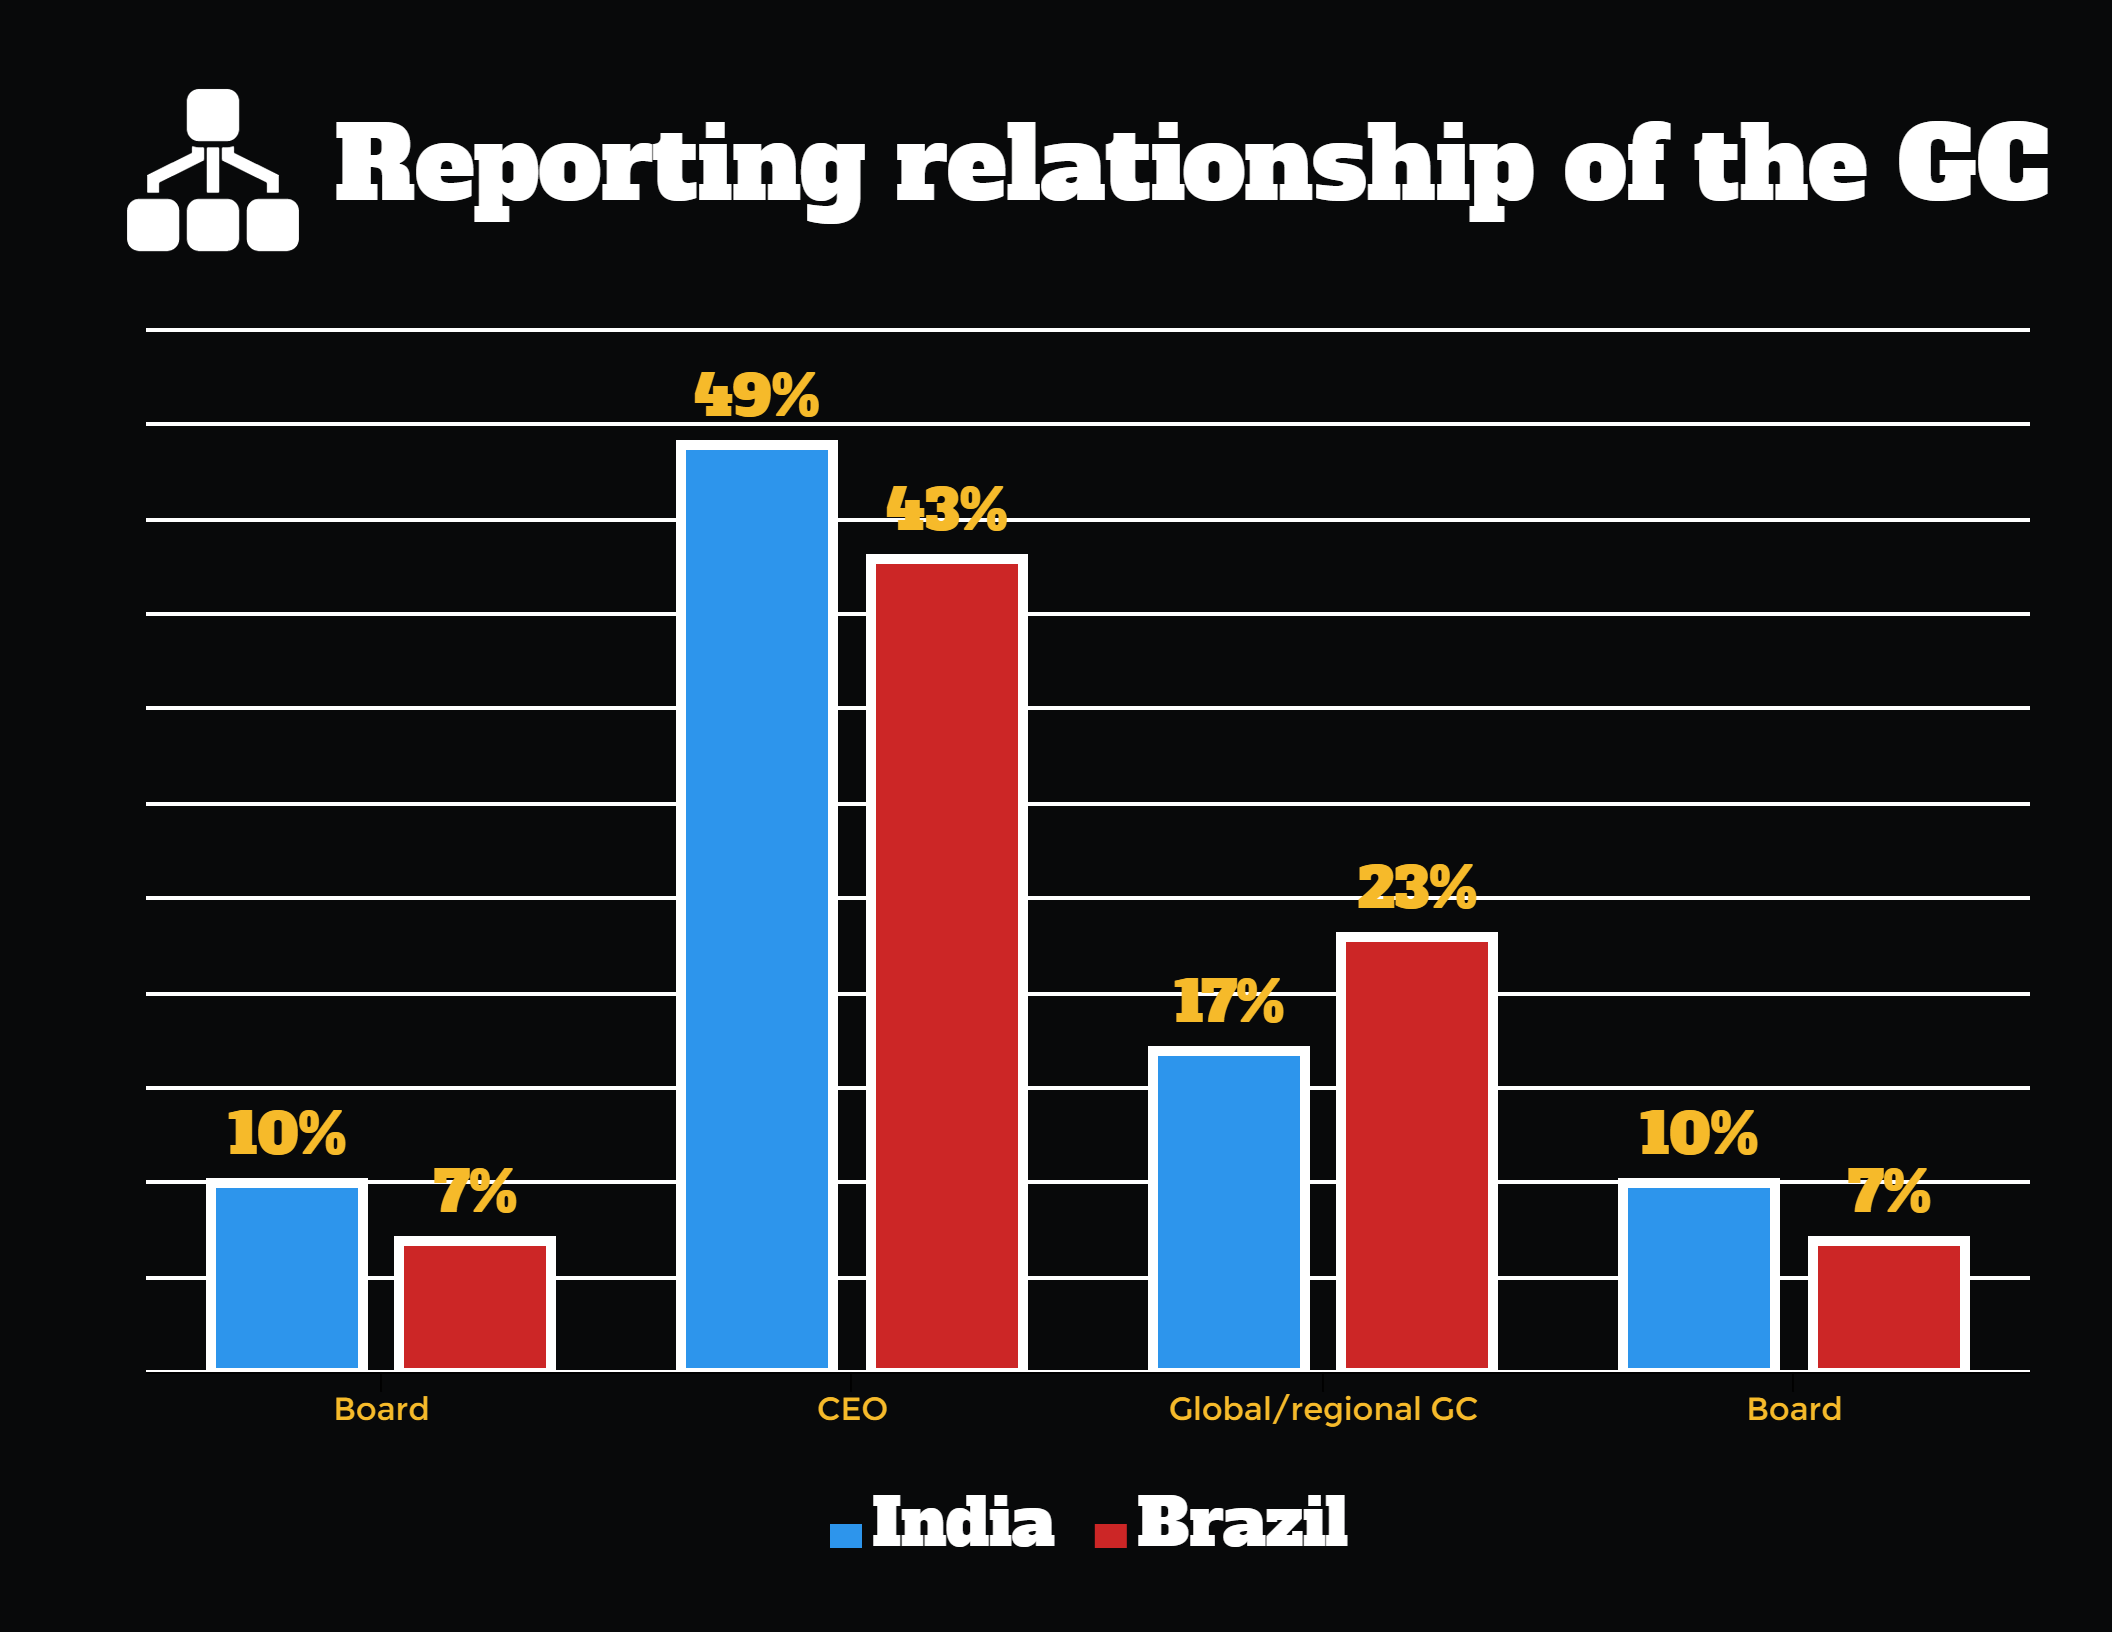 Reporting relationships of the general counsel in India and Brazil